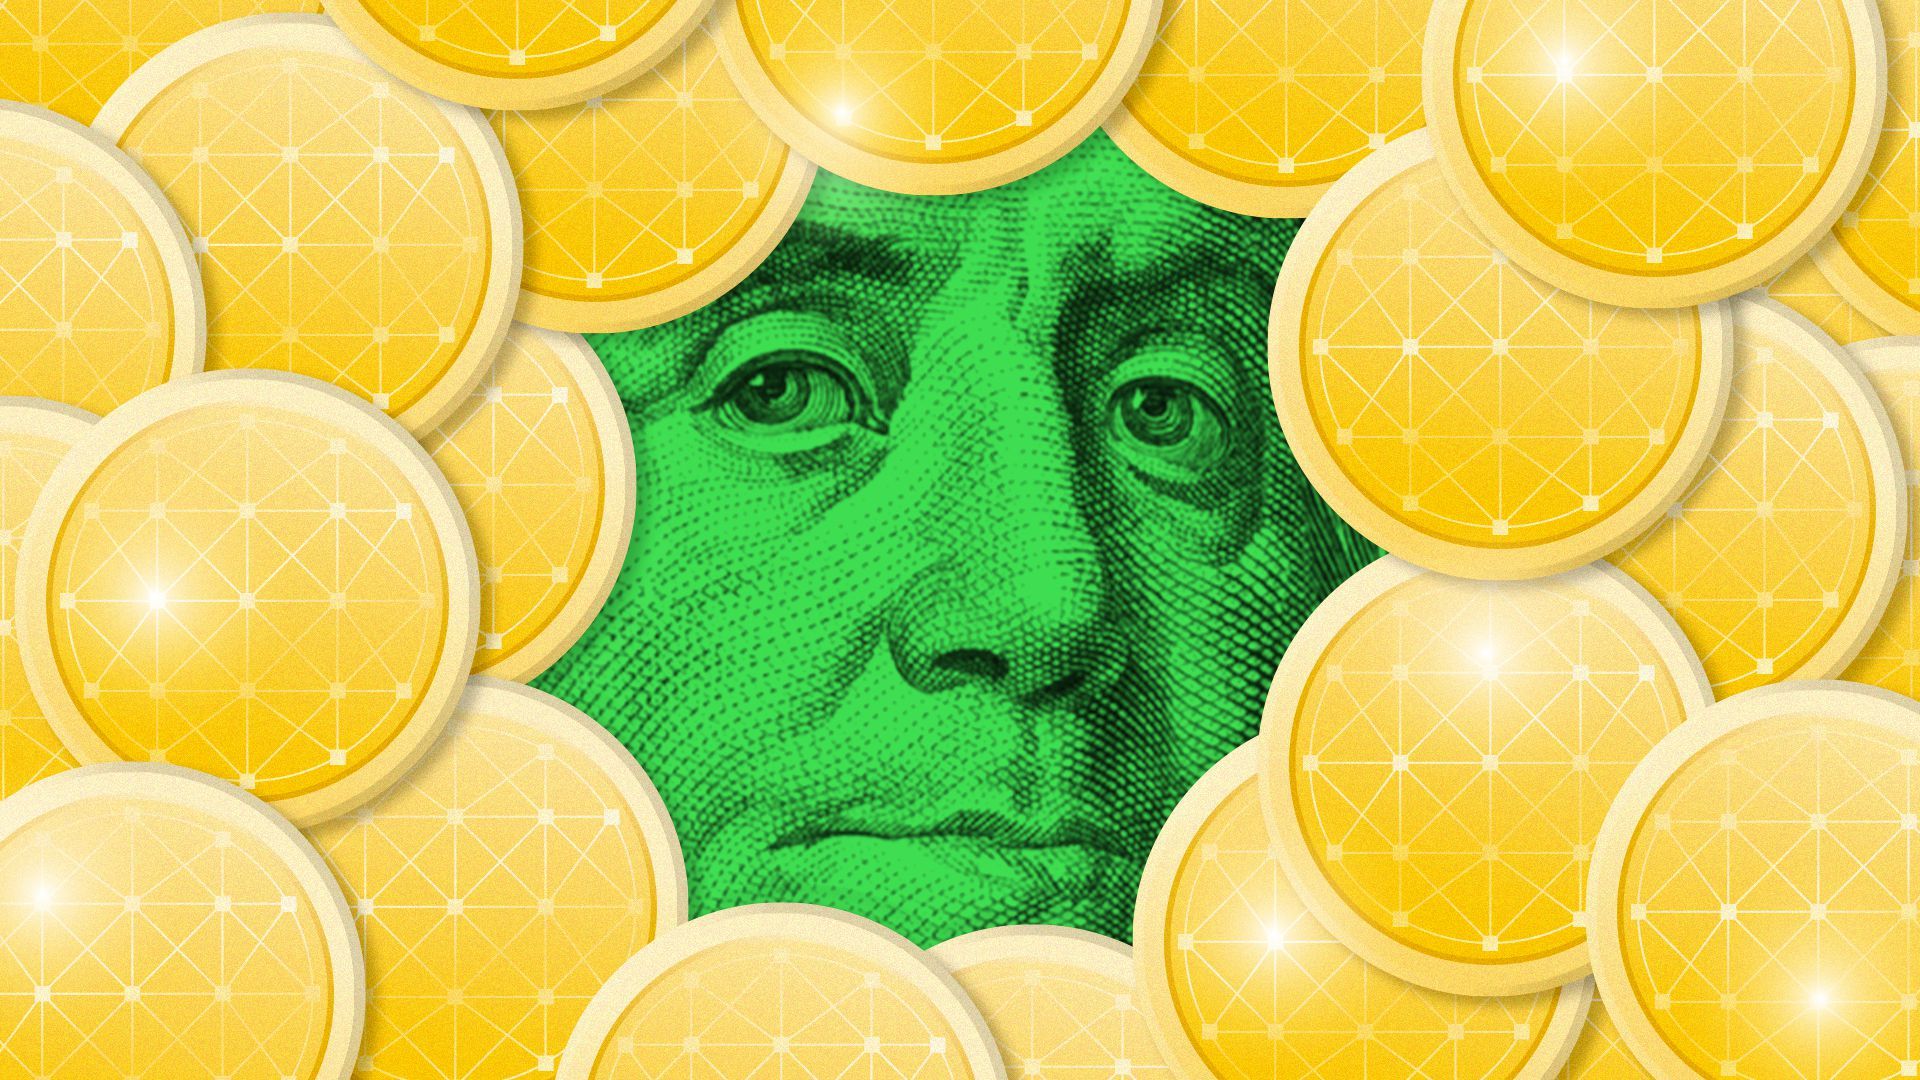 Illustration of Benjamin Franklin peering out from behind a pile of crypto coins.